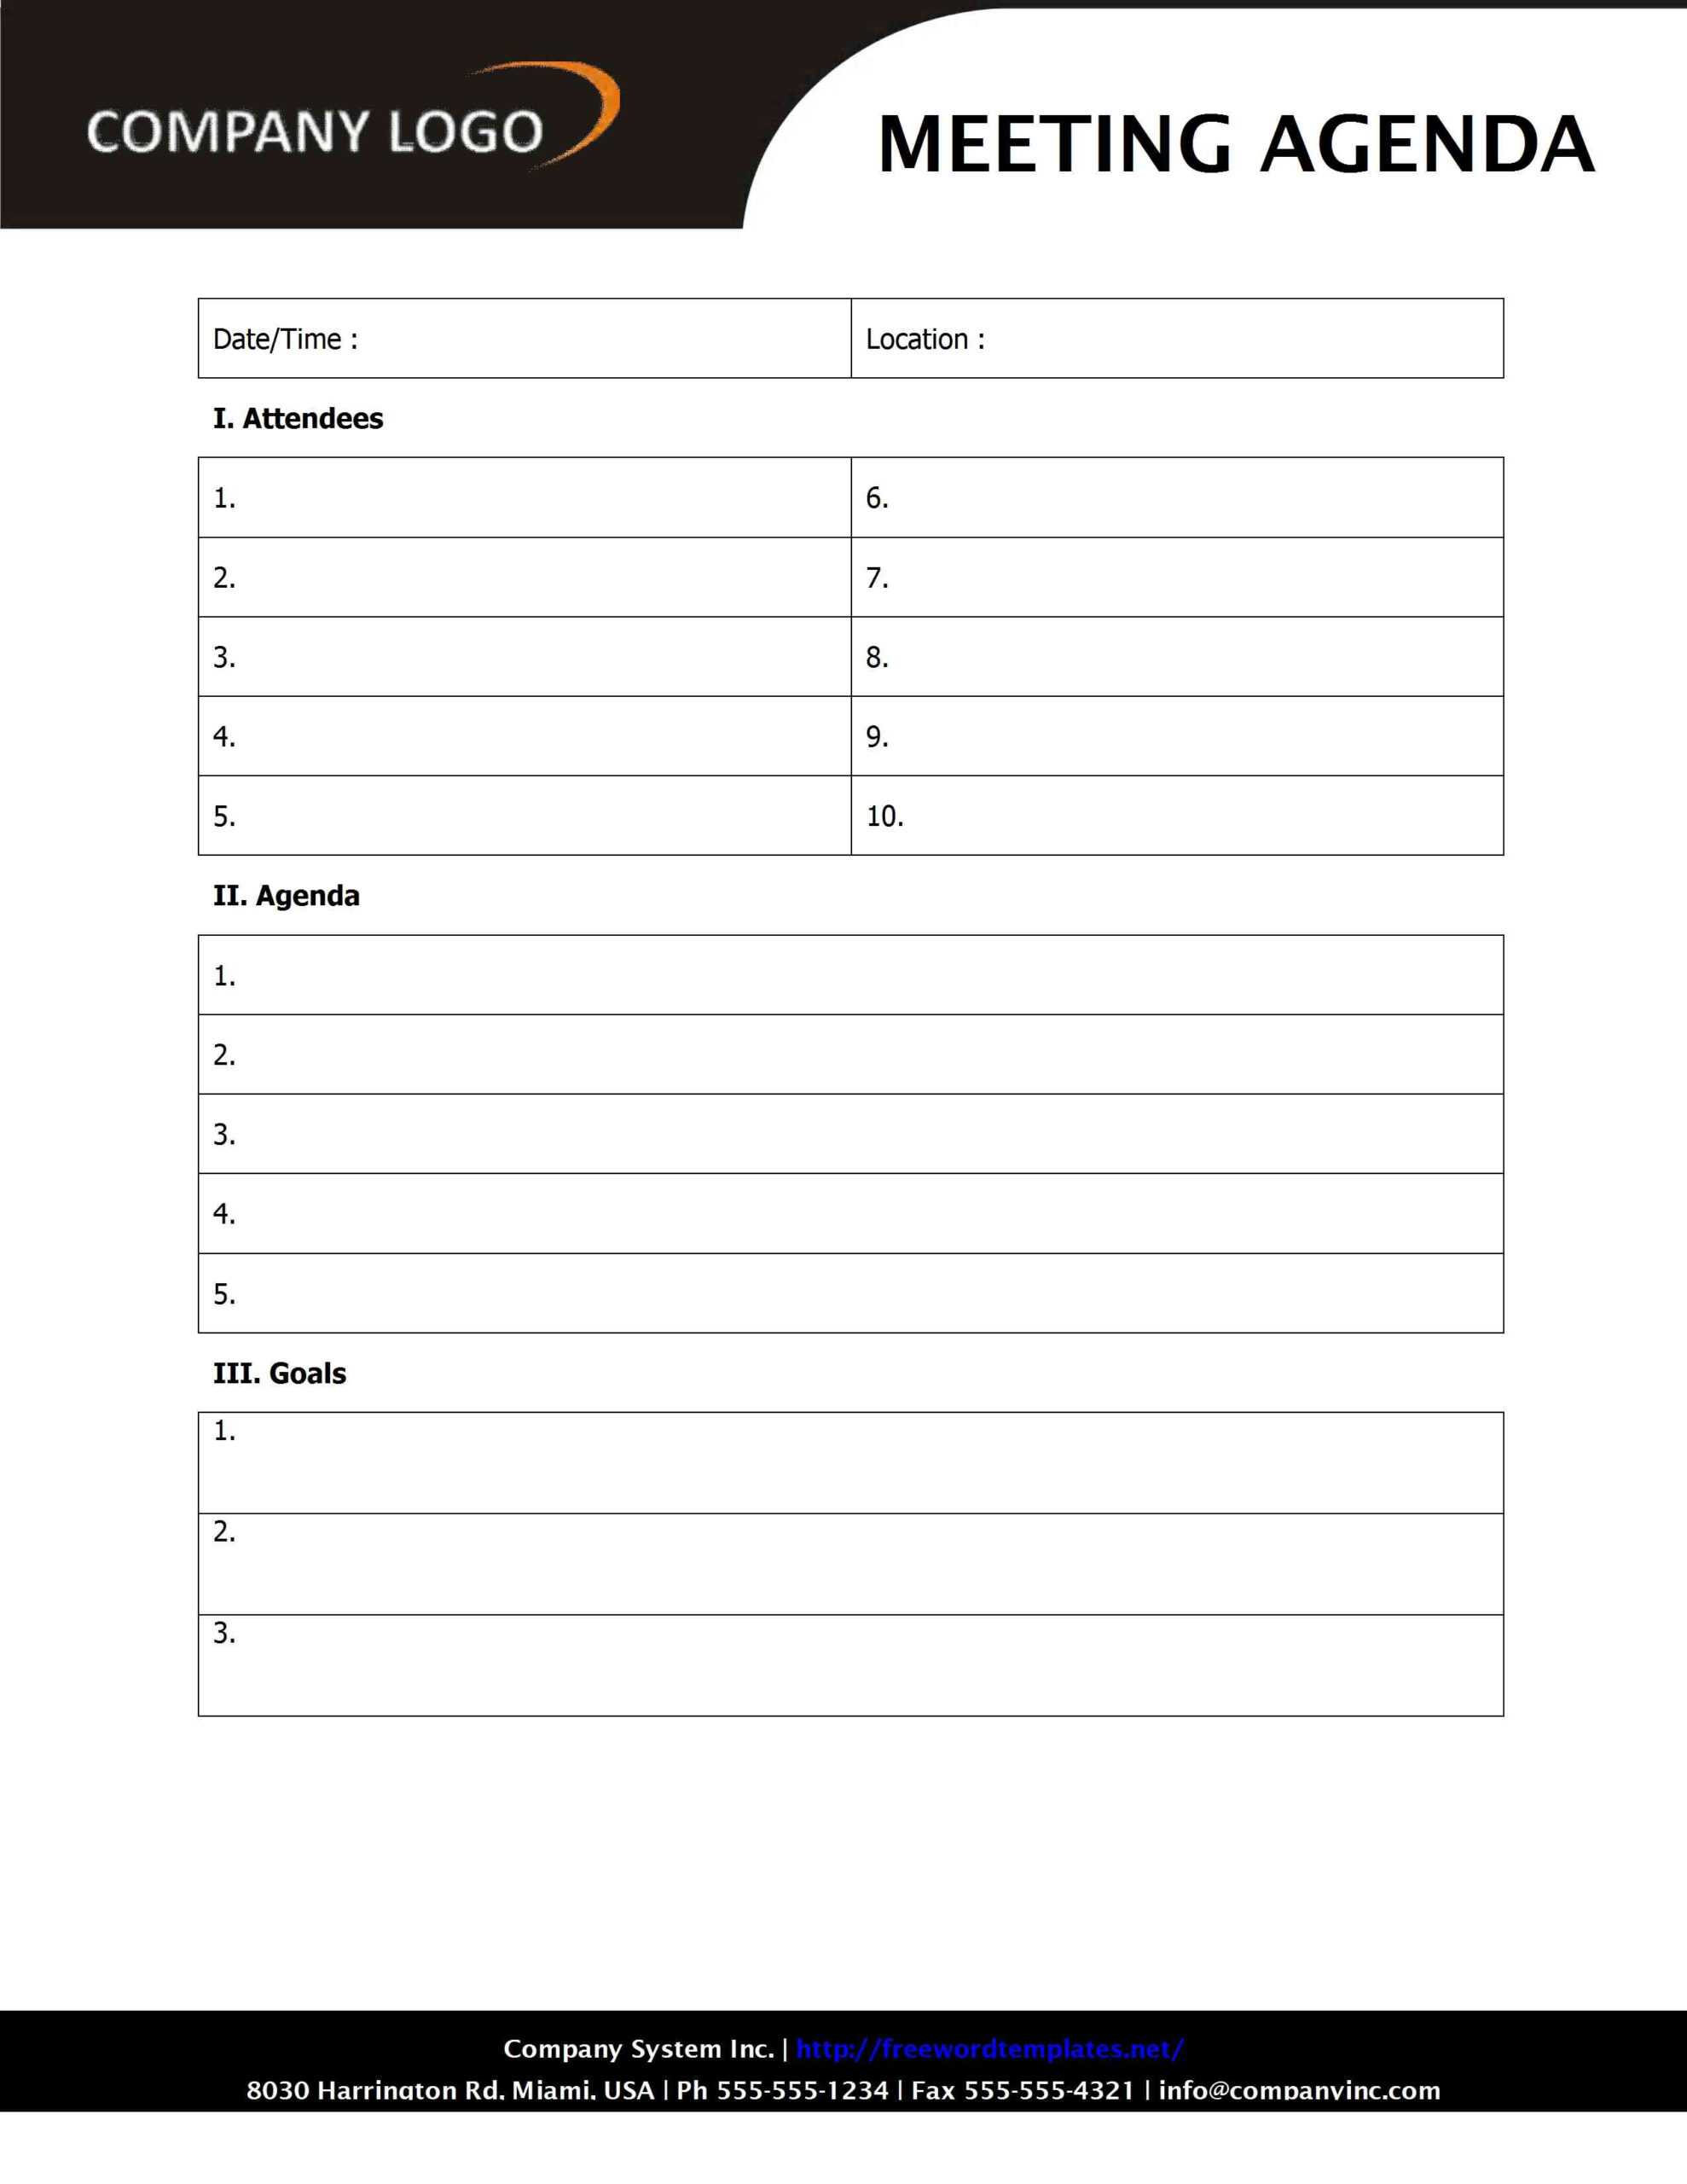 Templates Of Meeting Agenda Sd1 Style Within Free Meeting Agenda Templates For Word